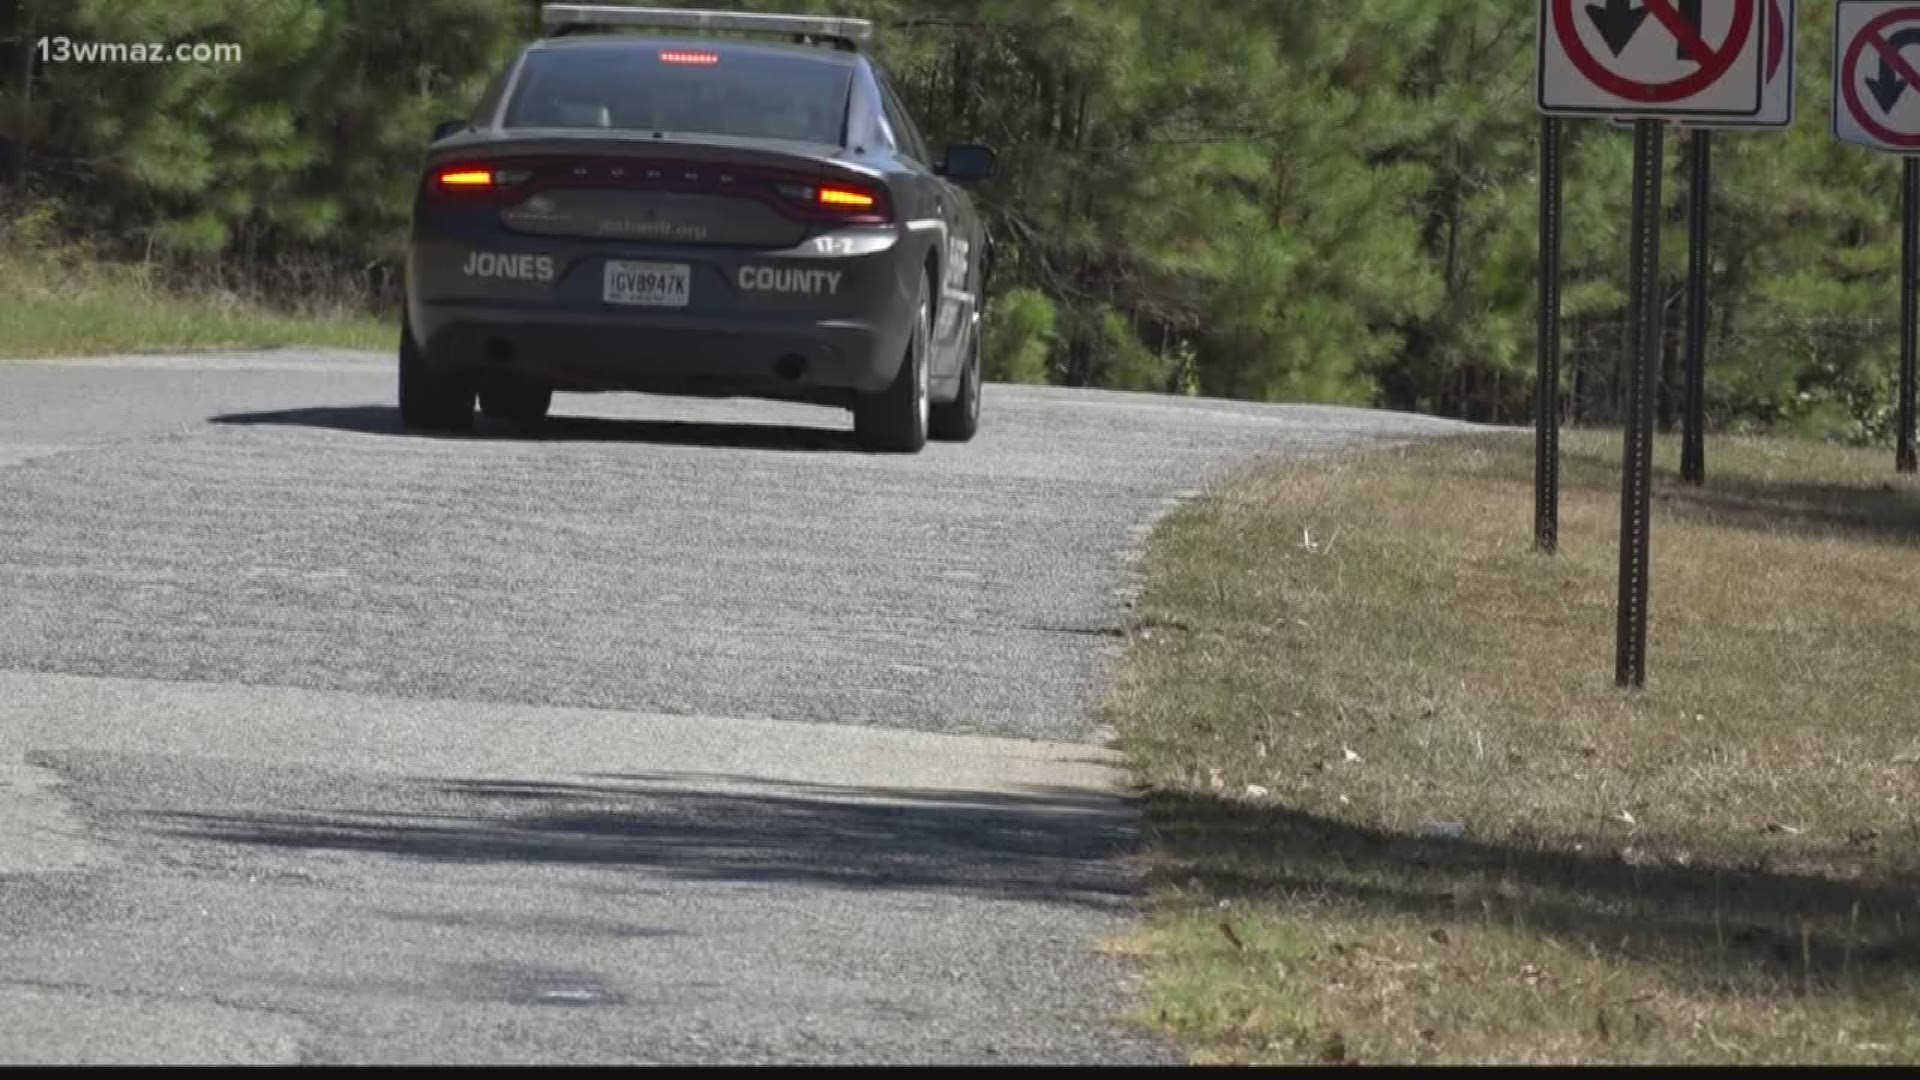 After several home break-ins over the last three weeks, the Jones County Sheriff's Department is encouraging one neighborhood to pay close attention.